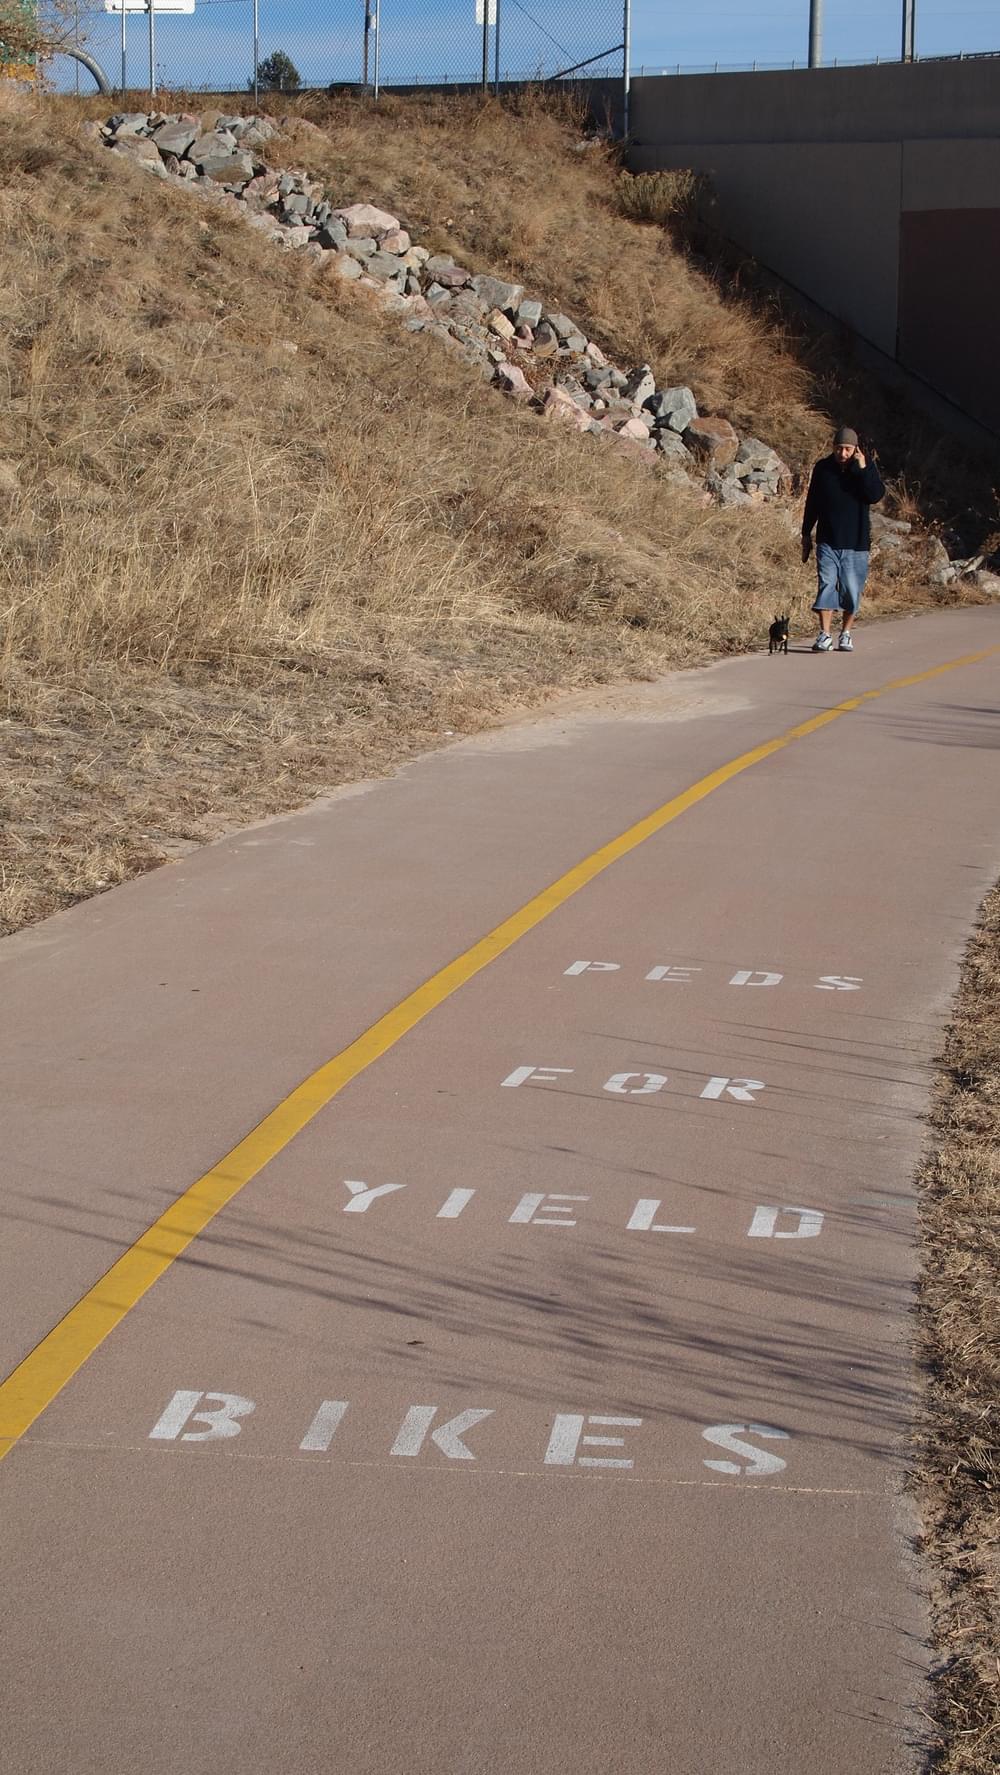 Stencils on trail pavement reinforce yield message on Cherry Creek Trail in Denver, Colorado